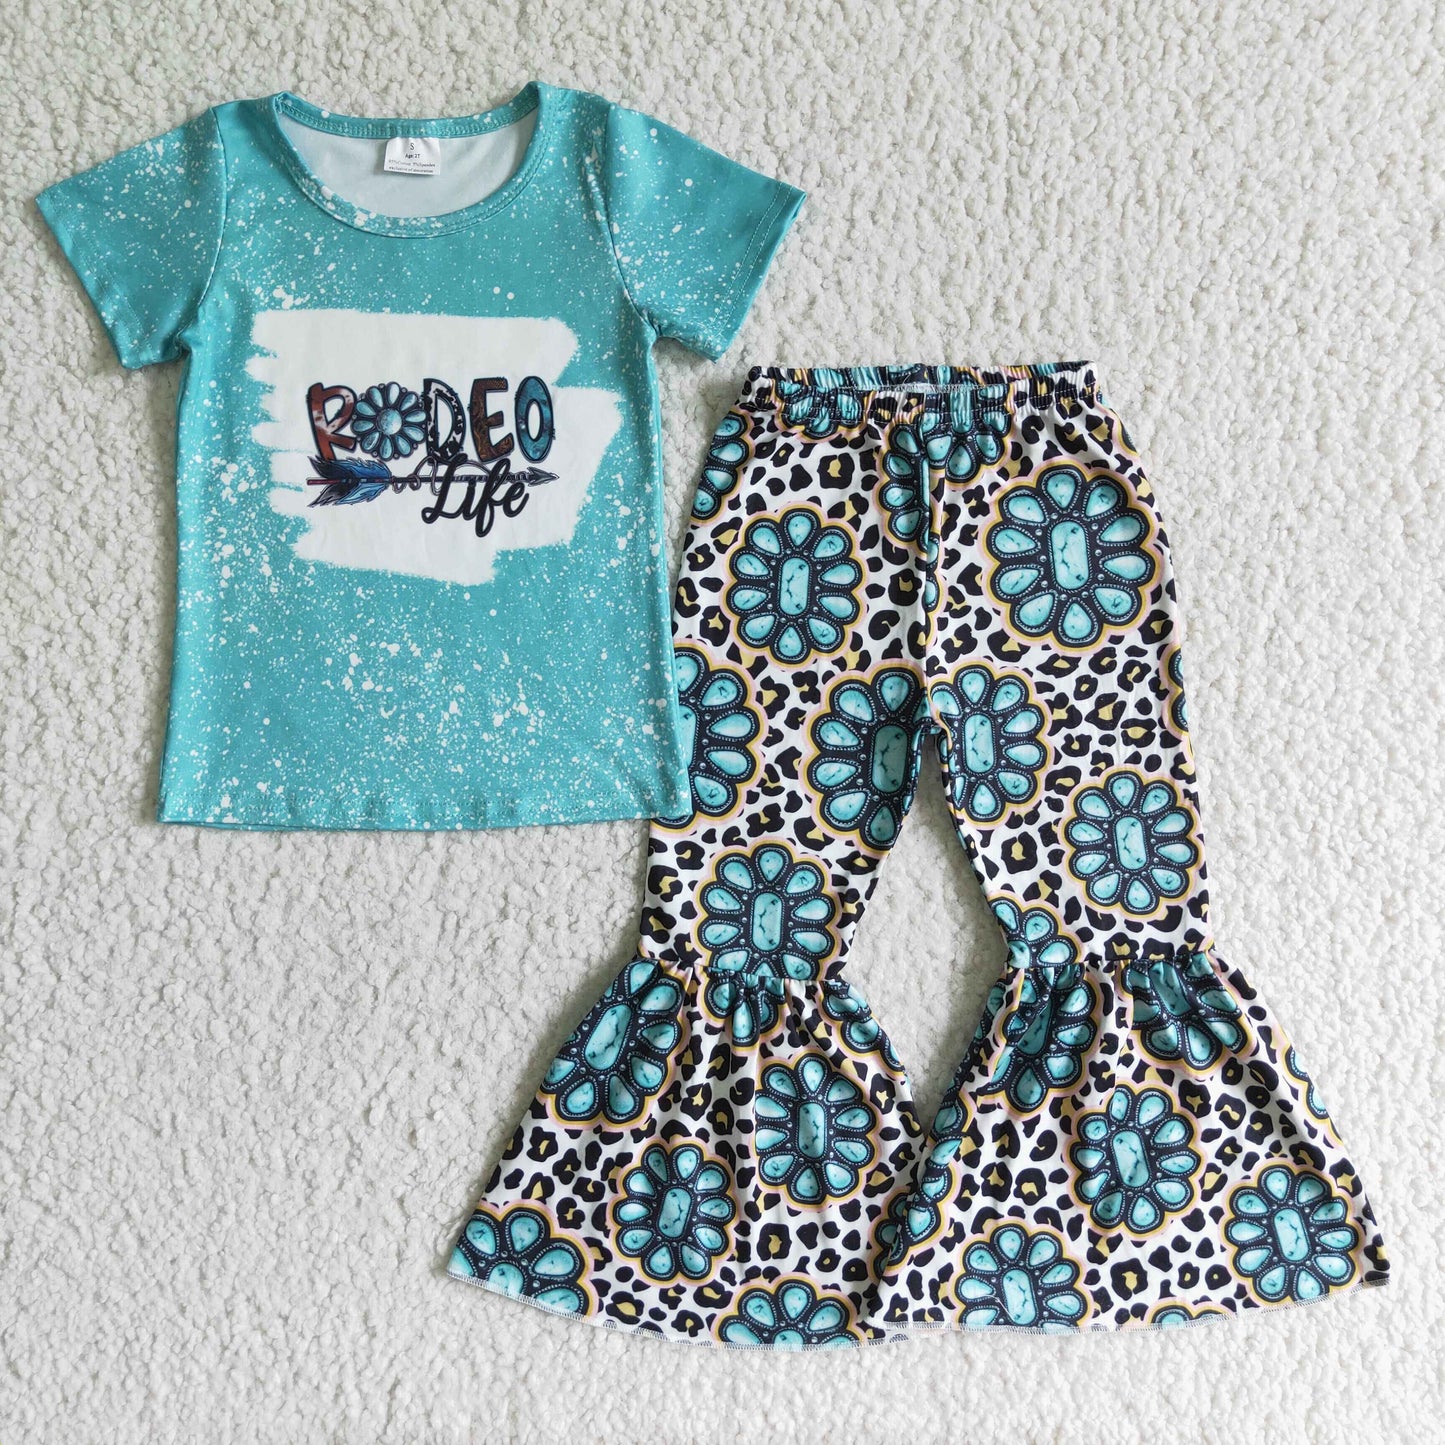 Rodeo turquoise leopard kids girls western outfits